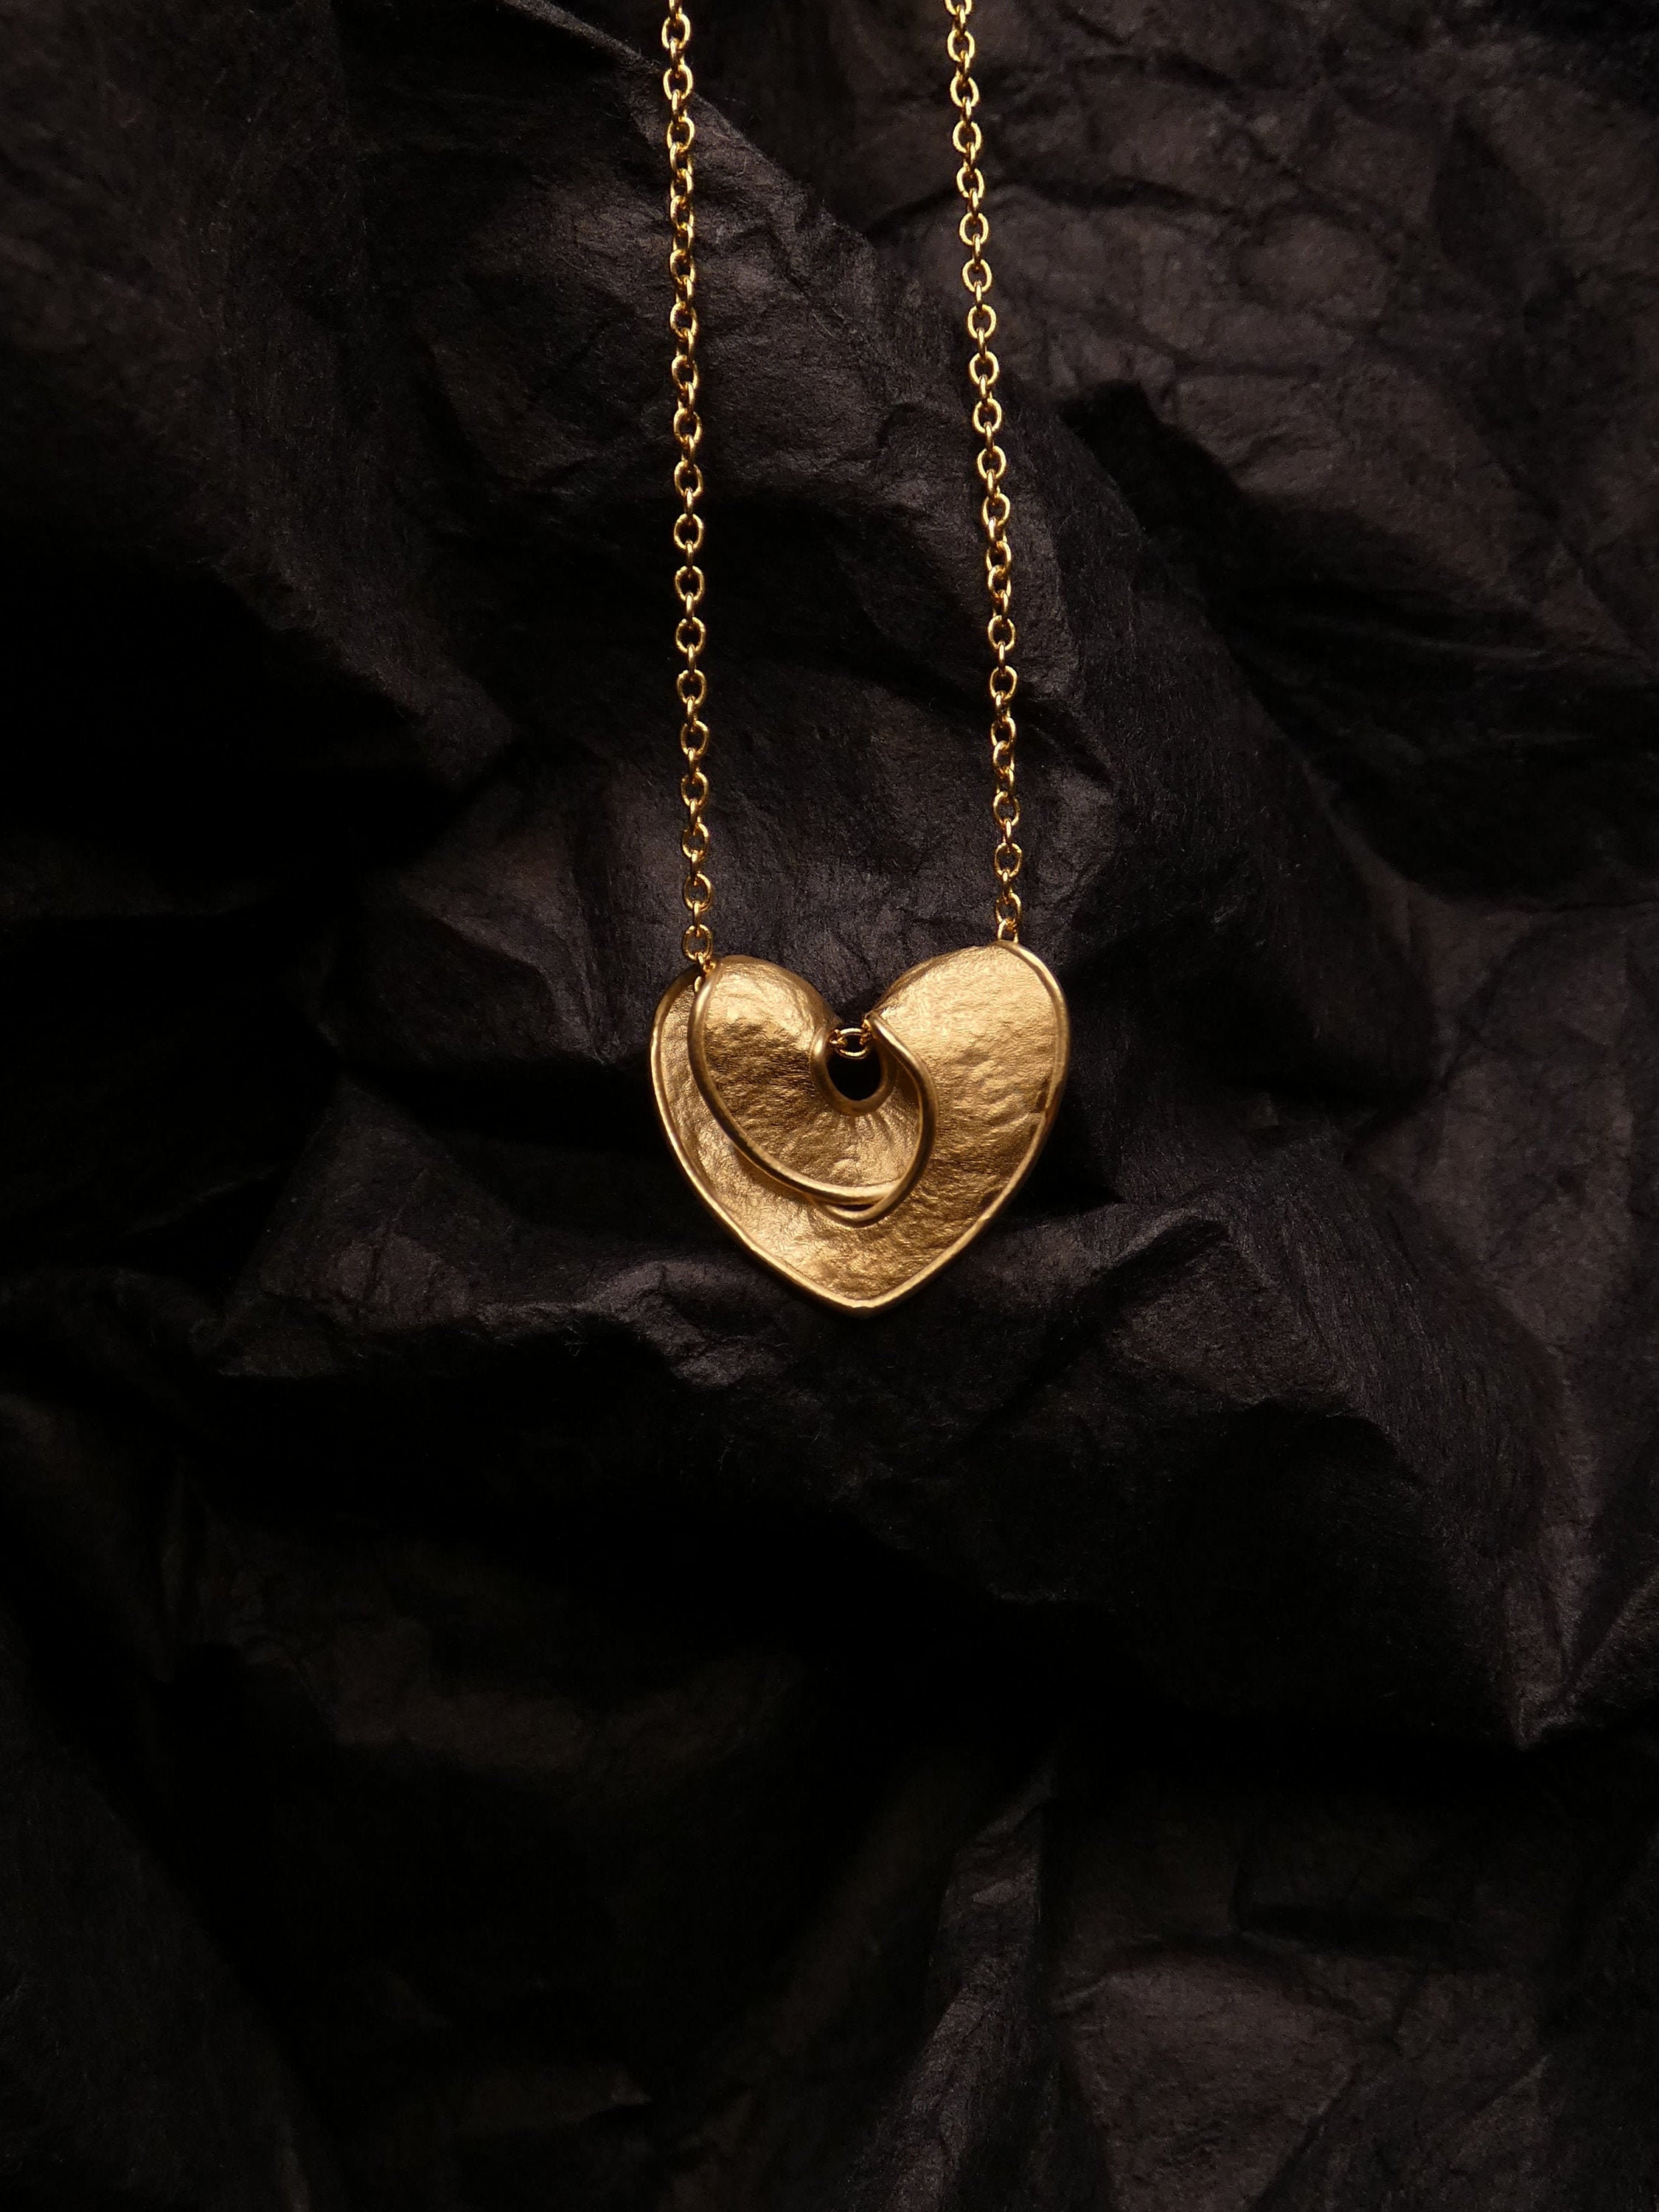 Heart Necklace in 14K Solid Gold Made Italy. Gold Heart Pendant Real Ready To Ship, Italian Fine Jewelry